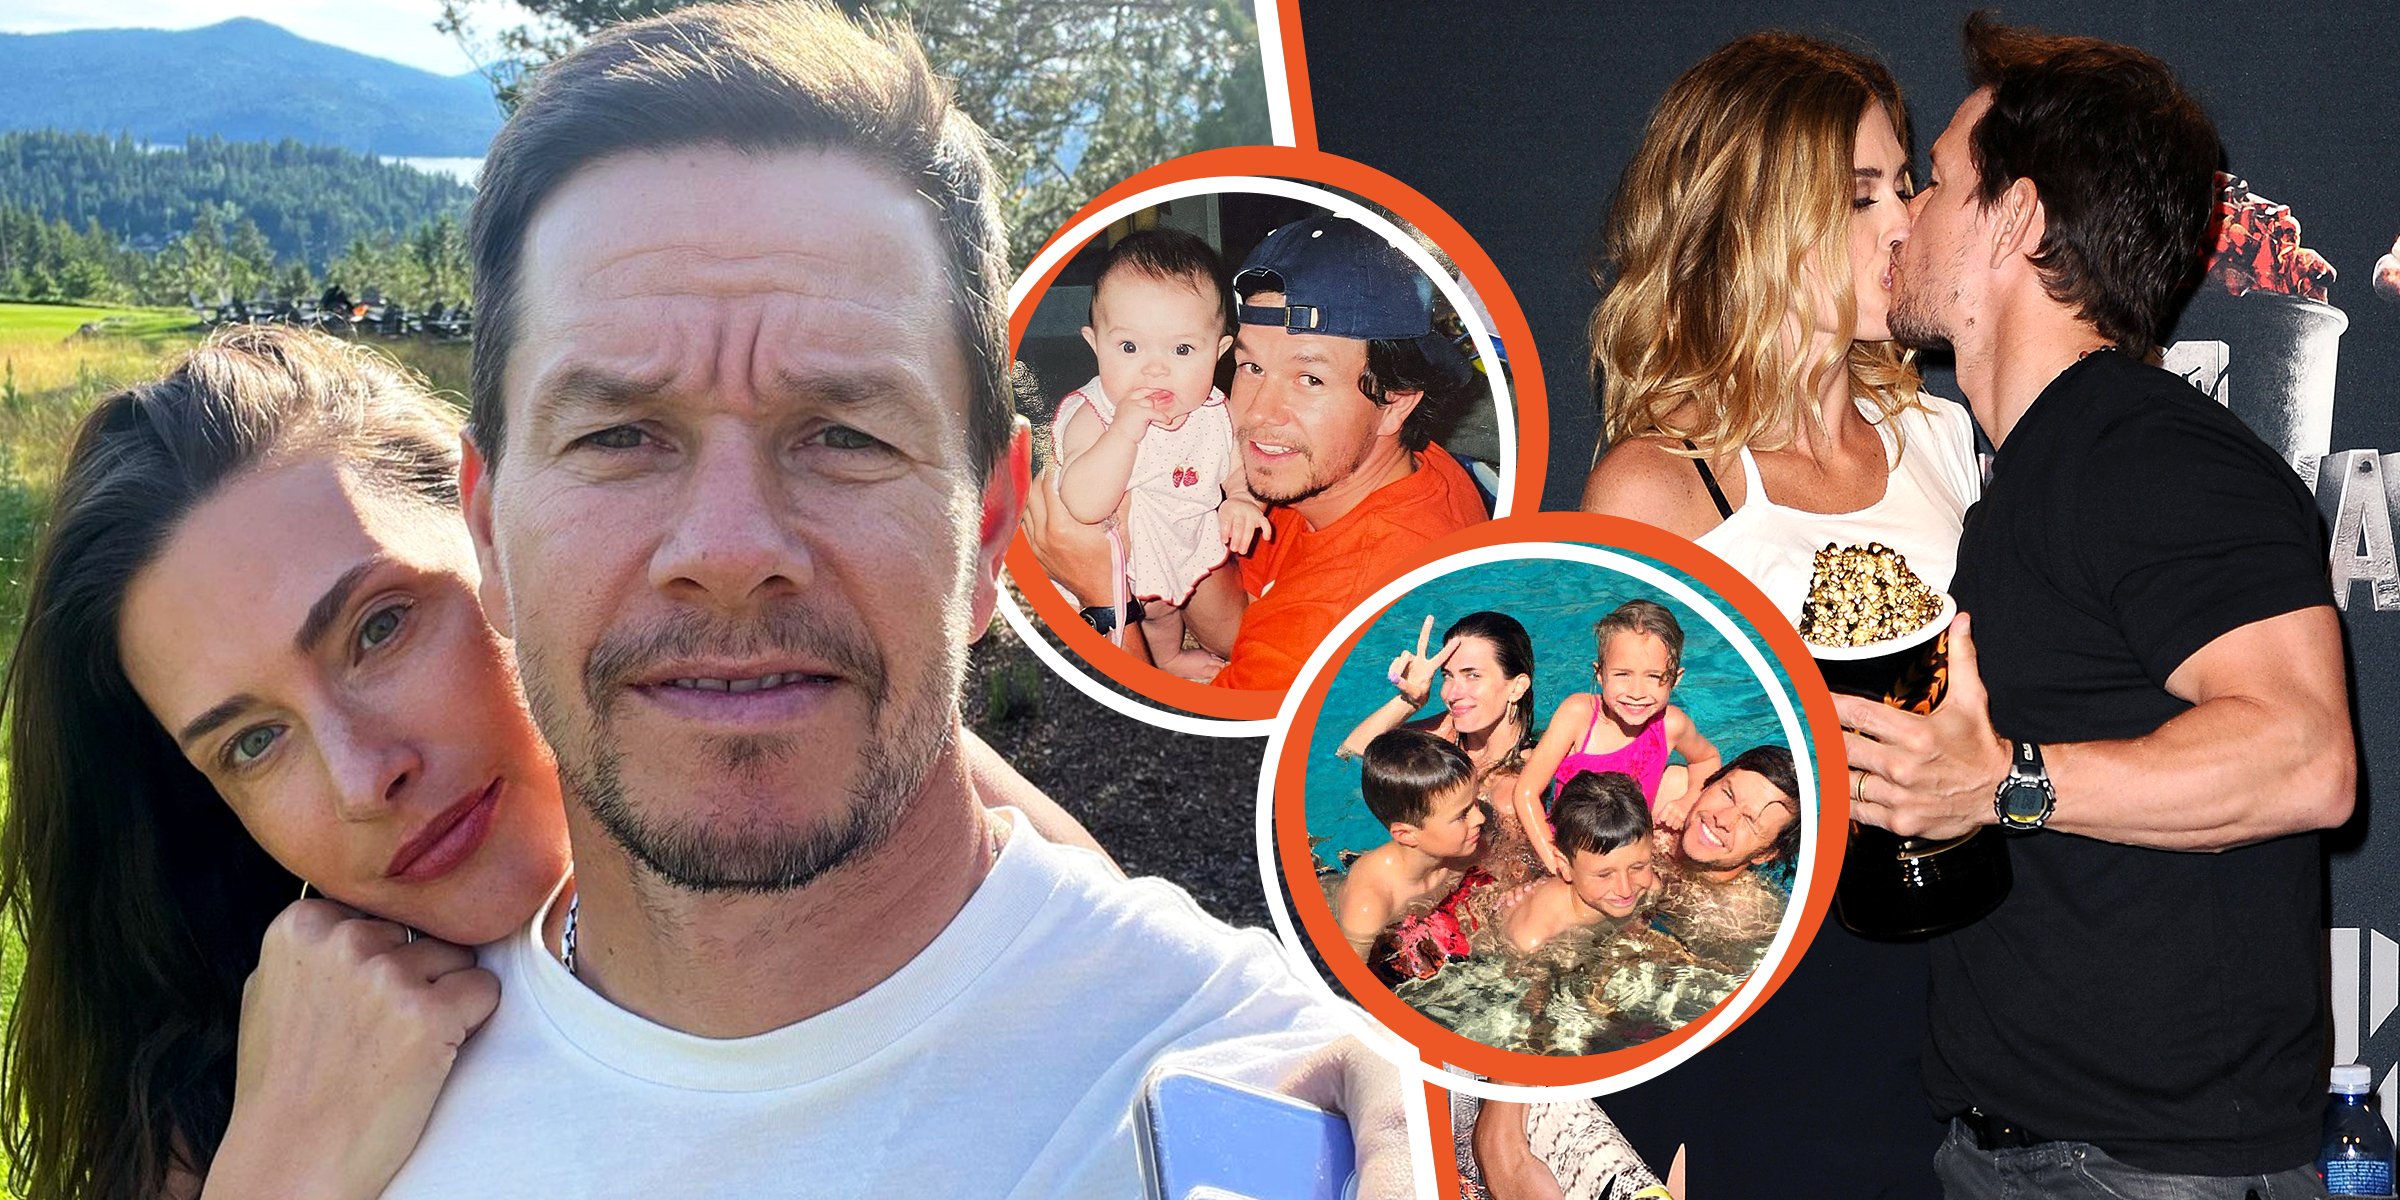 Mark and Rhea Wahlberg | Mark Wahlberg and his daughter | Mark Wahlberg and his children | Mark and Rhea Wahlberg | Source: instagram.com/markwahlberg | Getty Images 